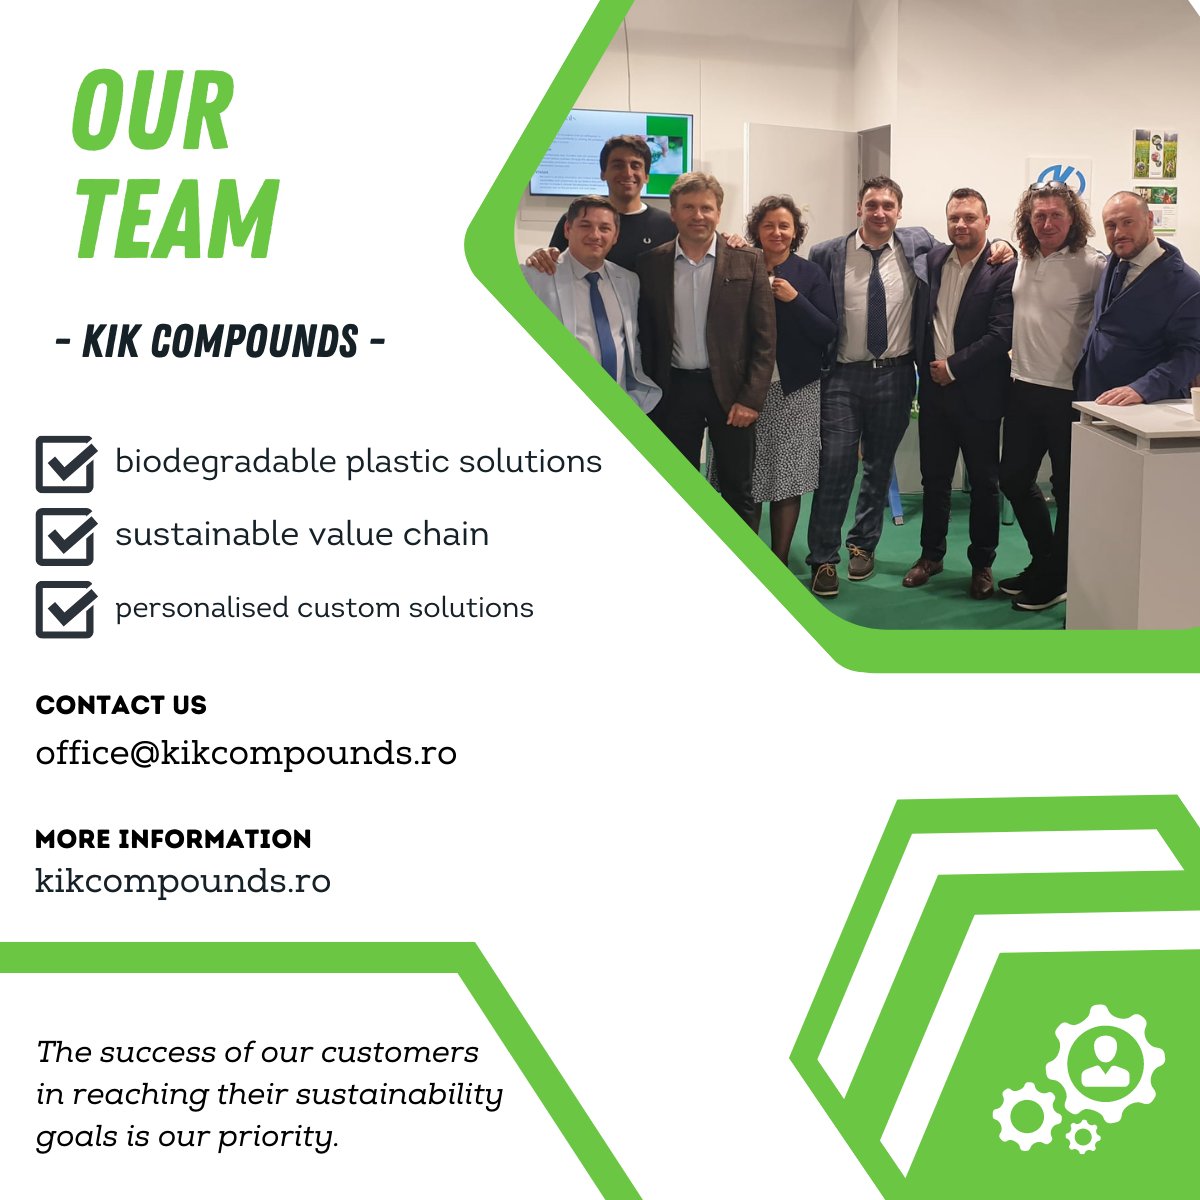 Great teams do great things! 
KIK Compounds presents its #biodegradable plastic solutions. Let's keep working to make the world greener and more #sustainable! #KIKTheHabit #KIKItRight